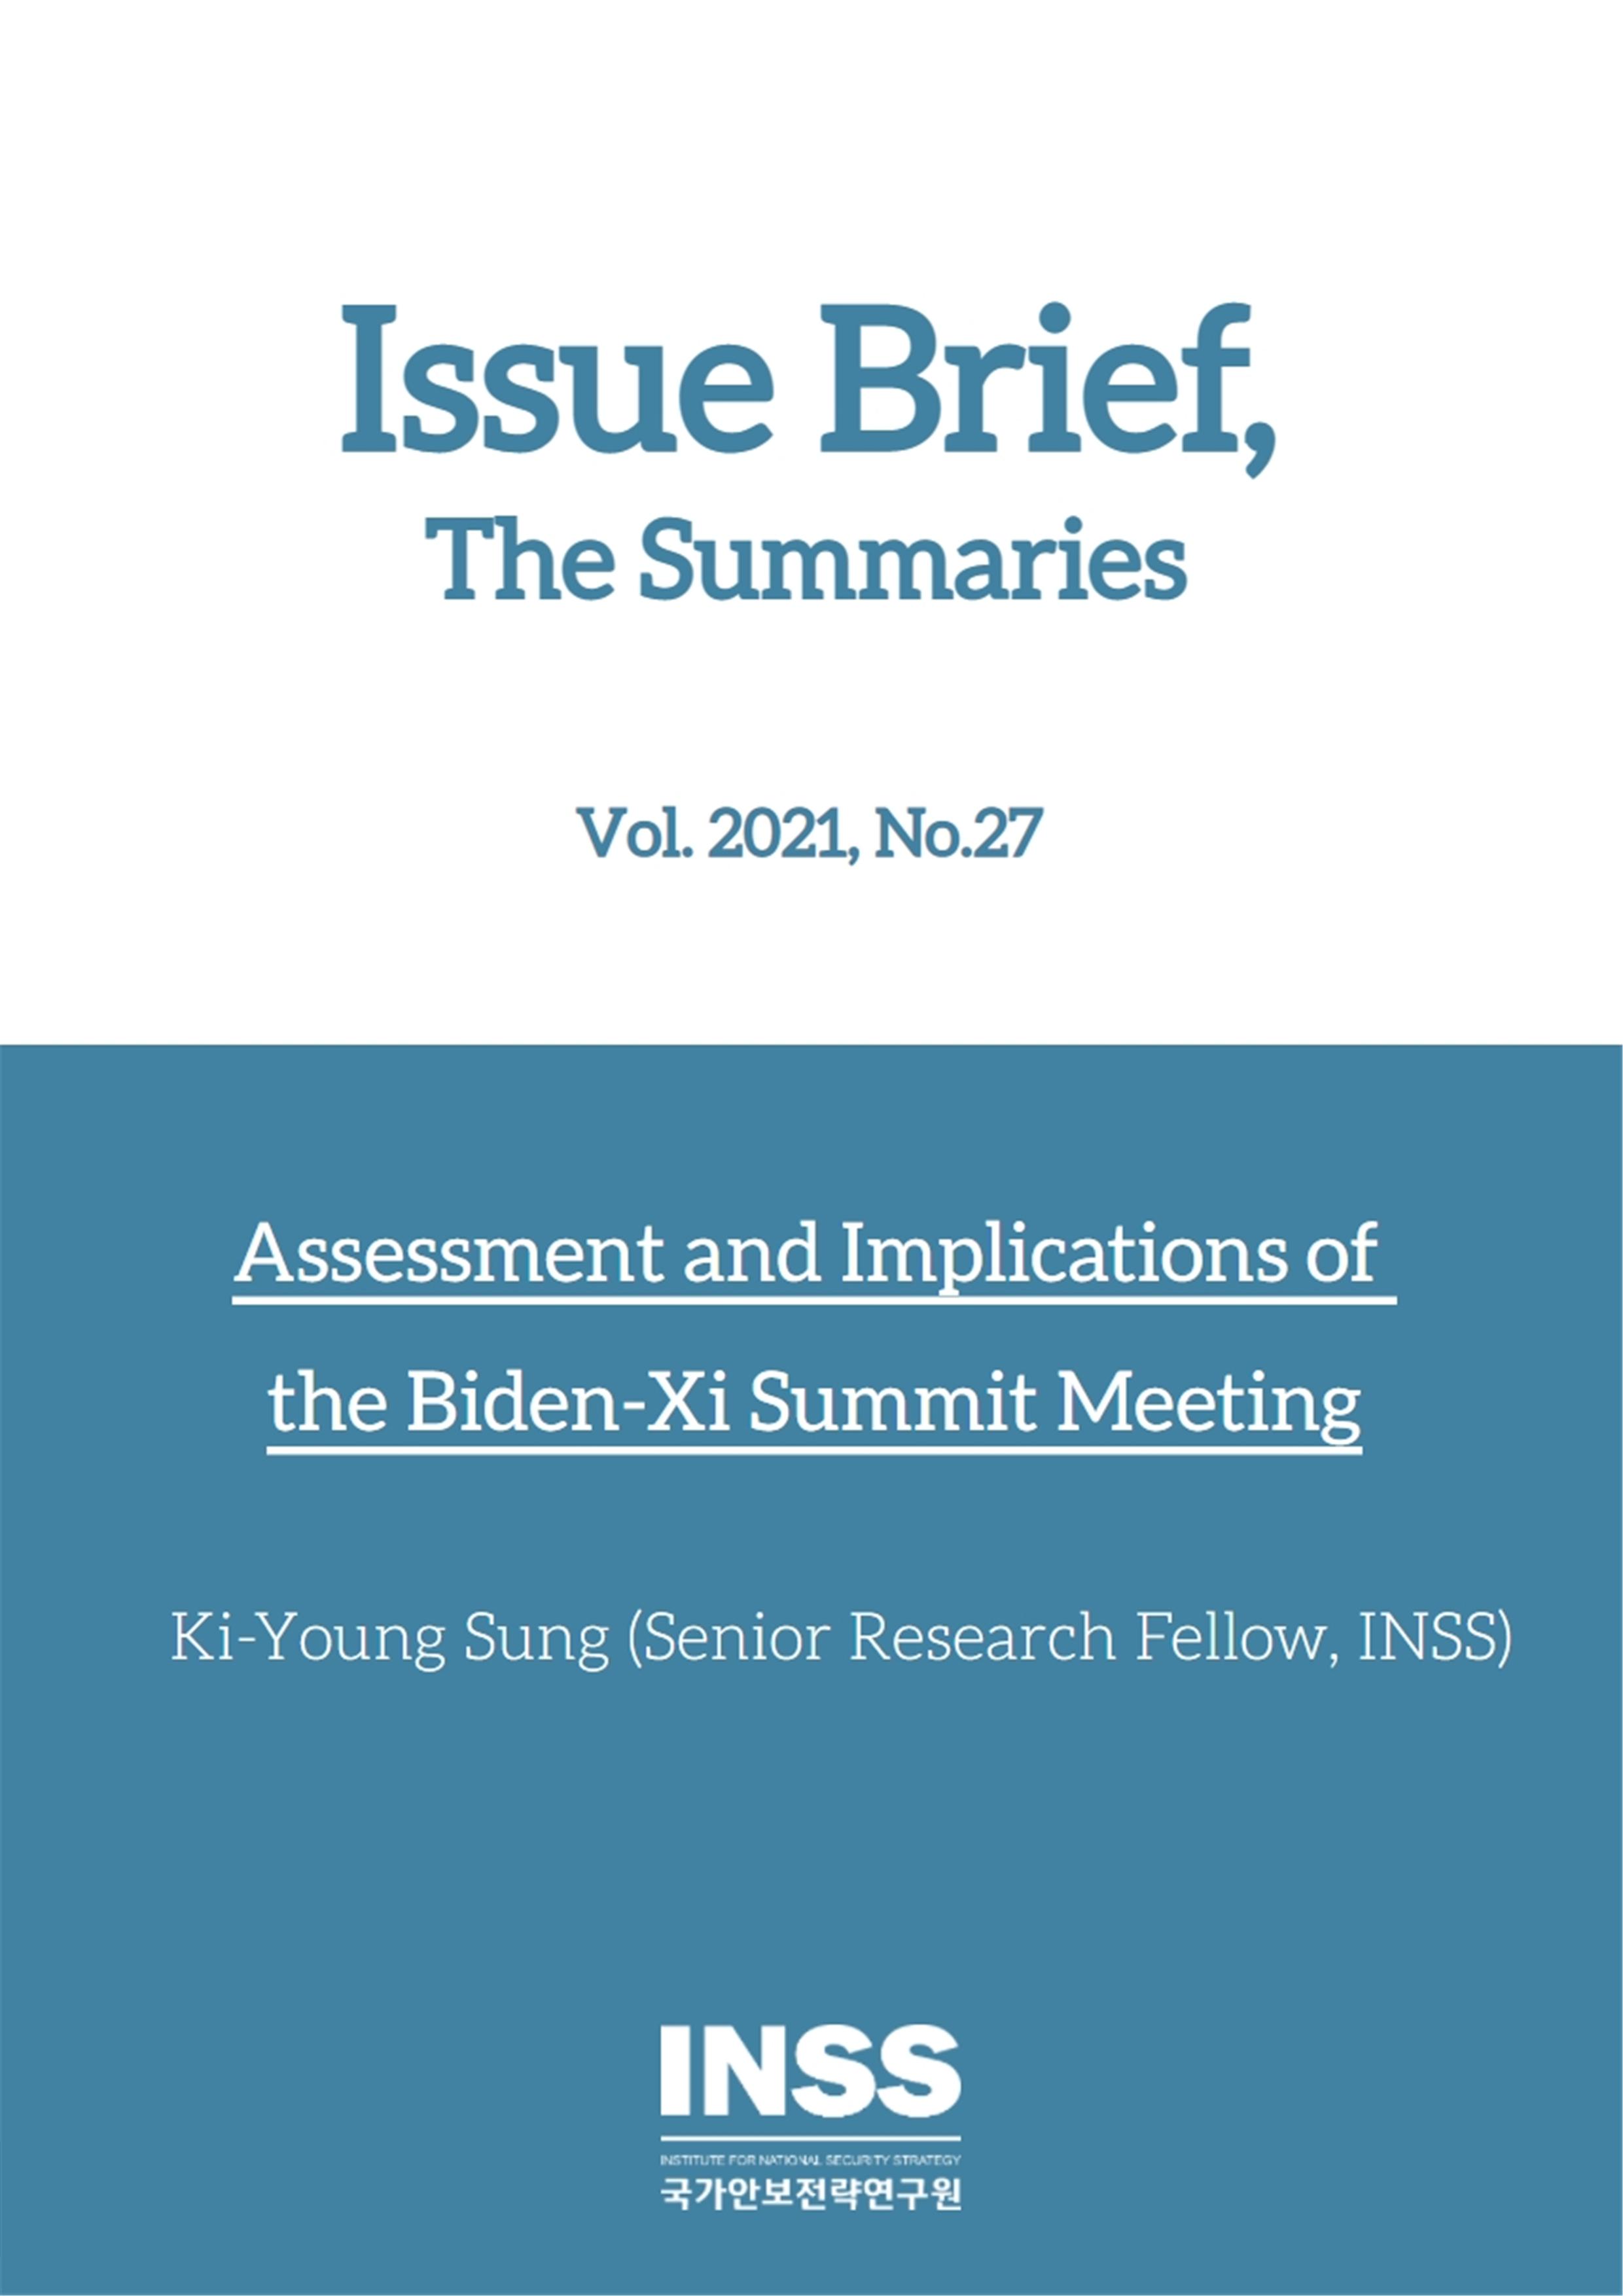 Assessment and Implications of the Biden-Xi Summit Meeting